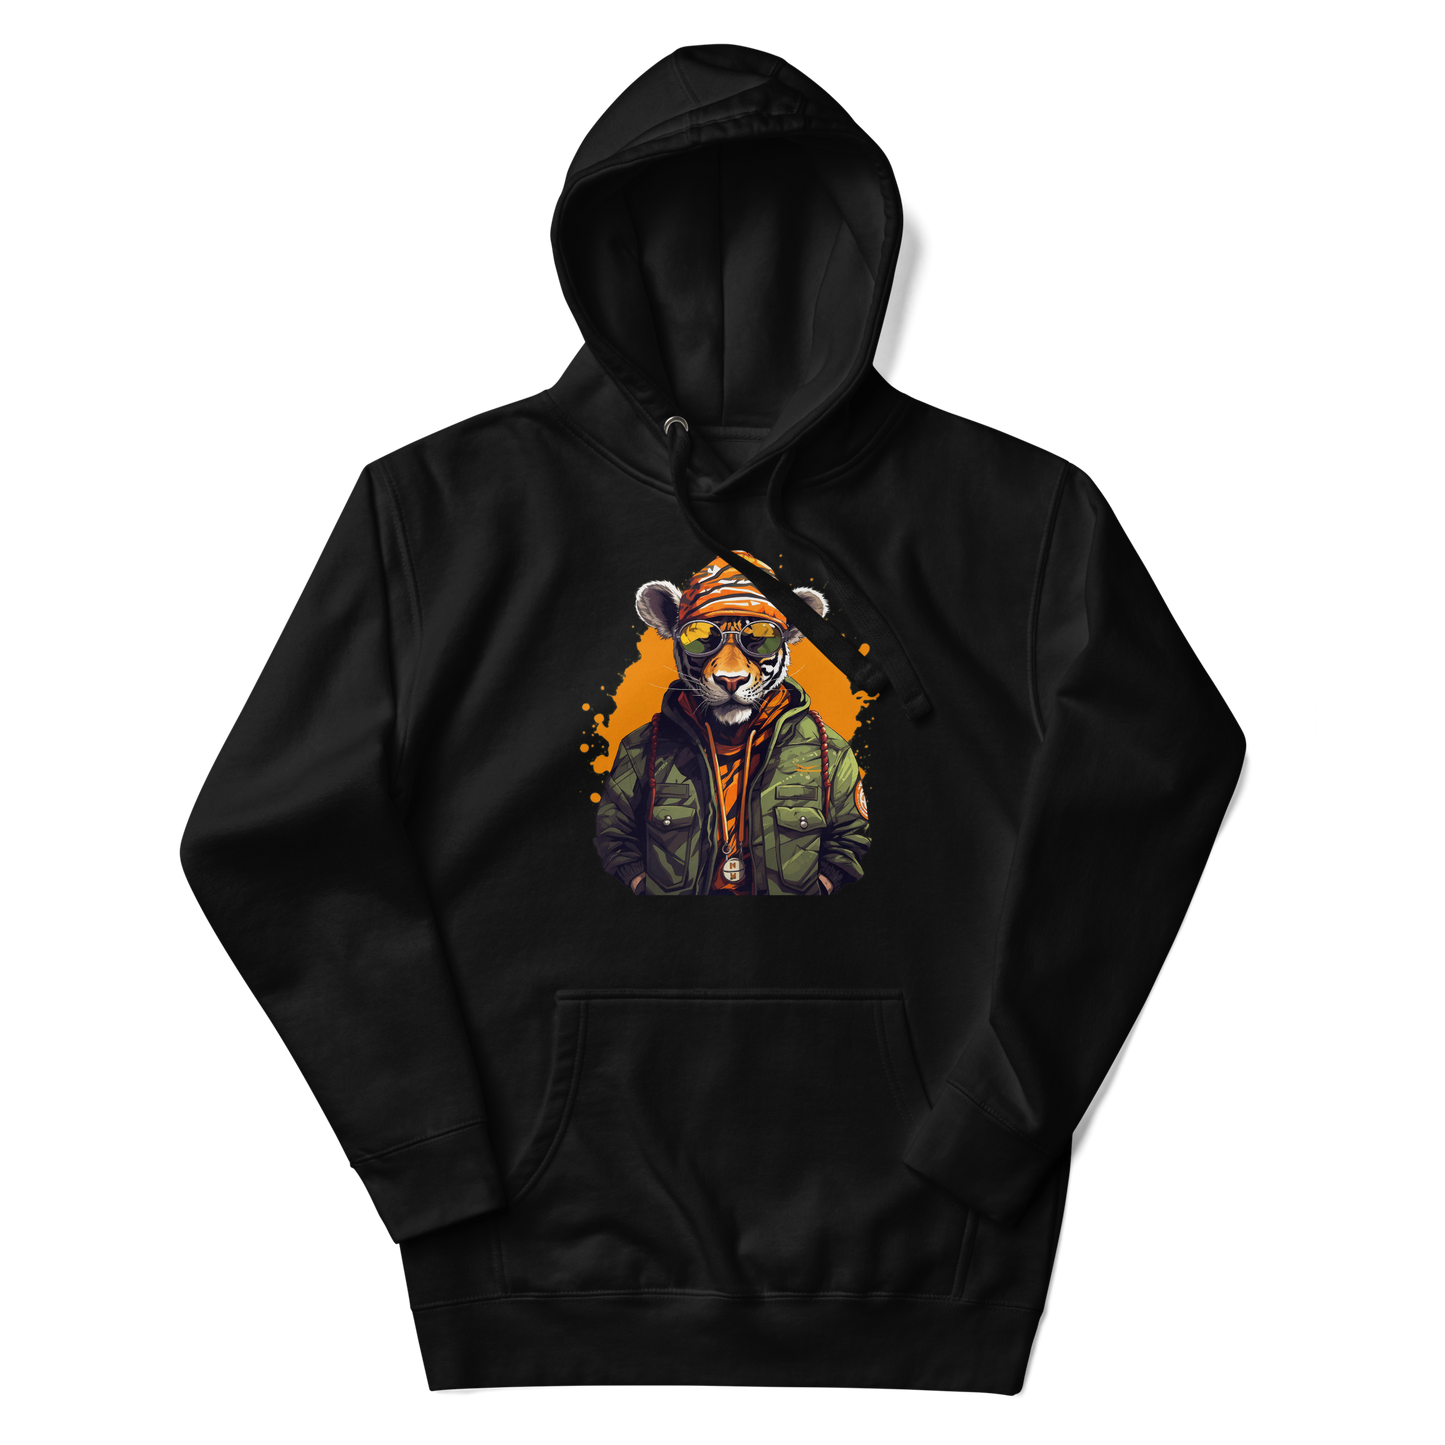 The Jungle Graphic Hoodie